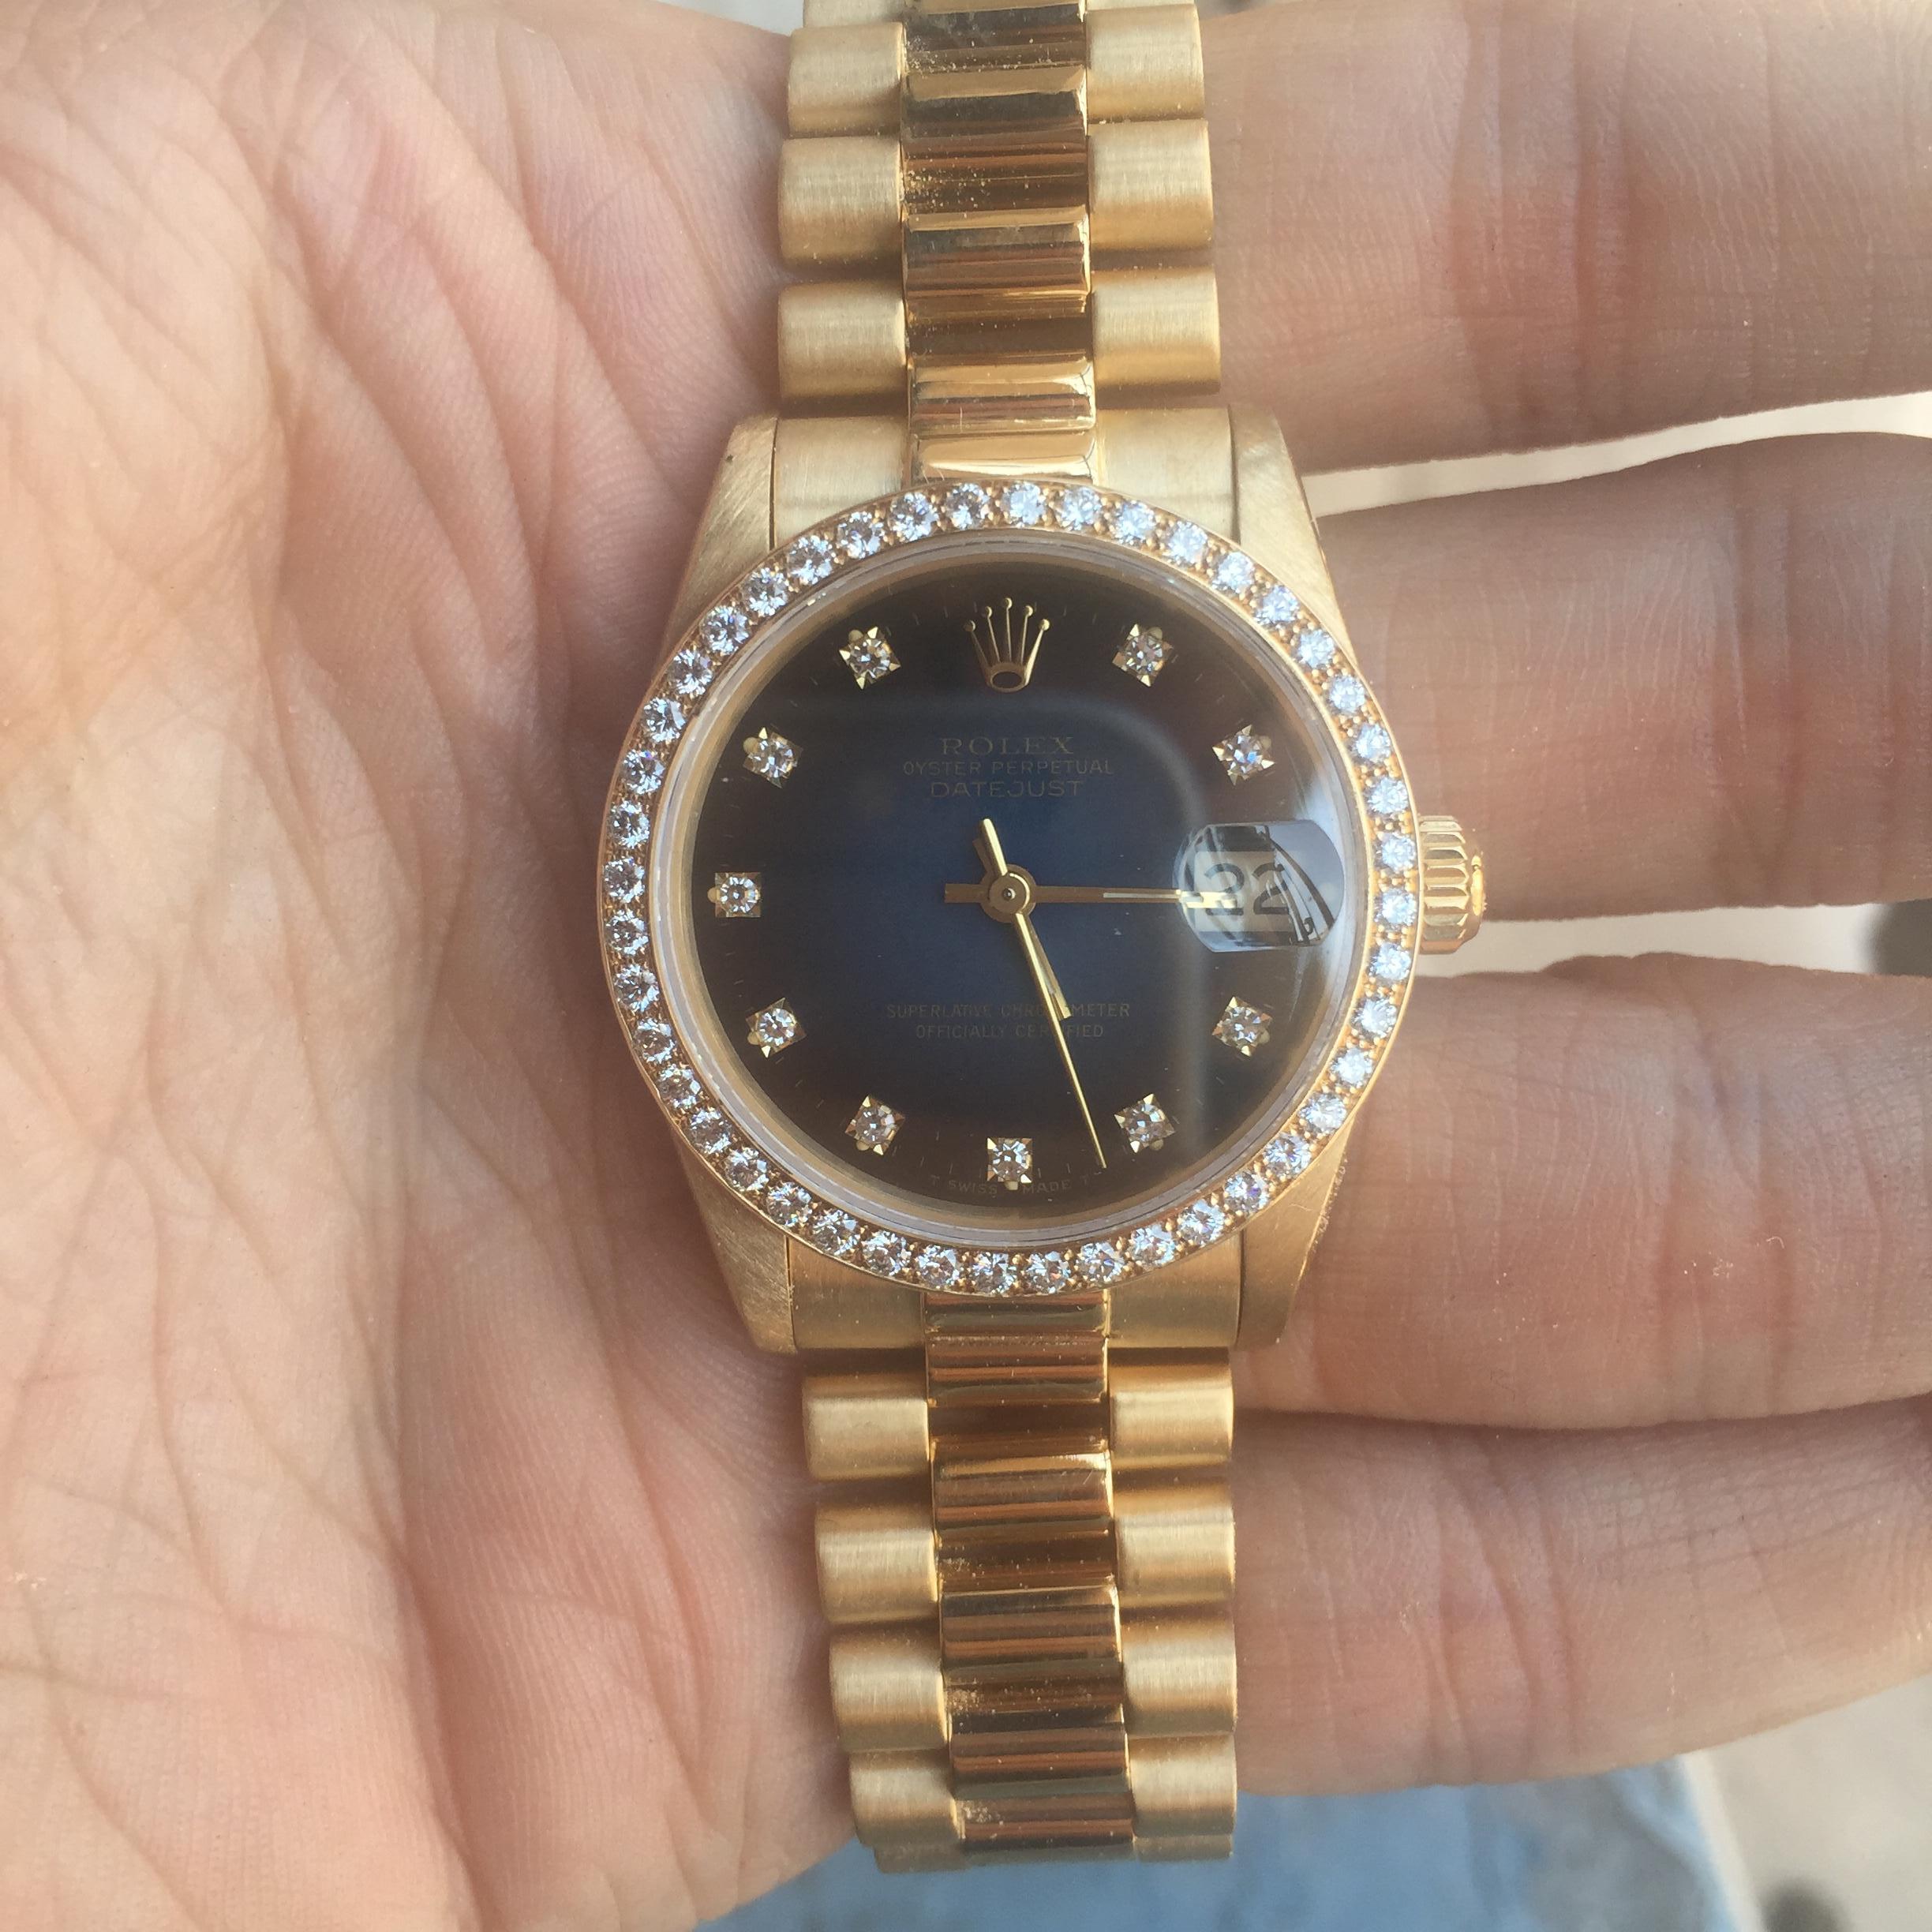 If you want a different dial color like black with diamond or silver with diamond or any color let me know and I can probably change it for you.

Selling a Very Good Condition 18k Yellow Gold Ladies Datejust With Factory Blue Vignette Diamond Dial